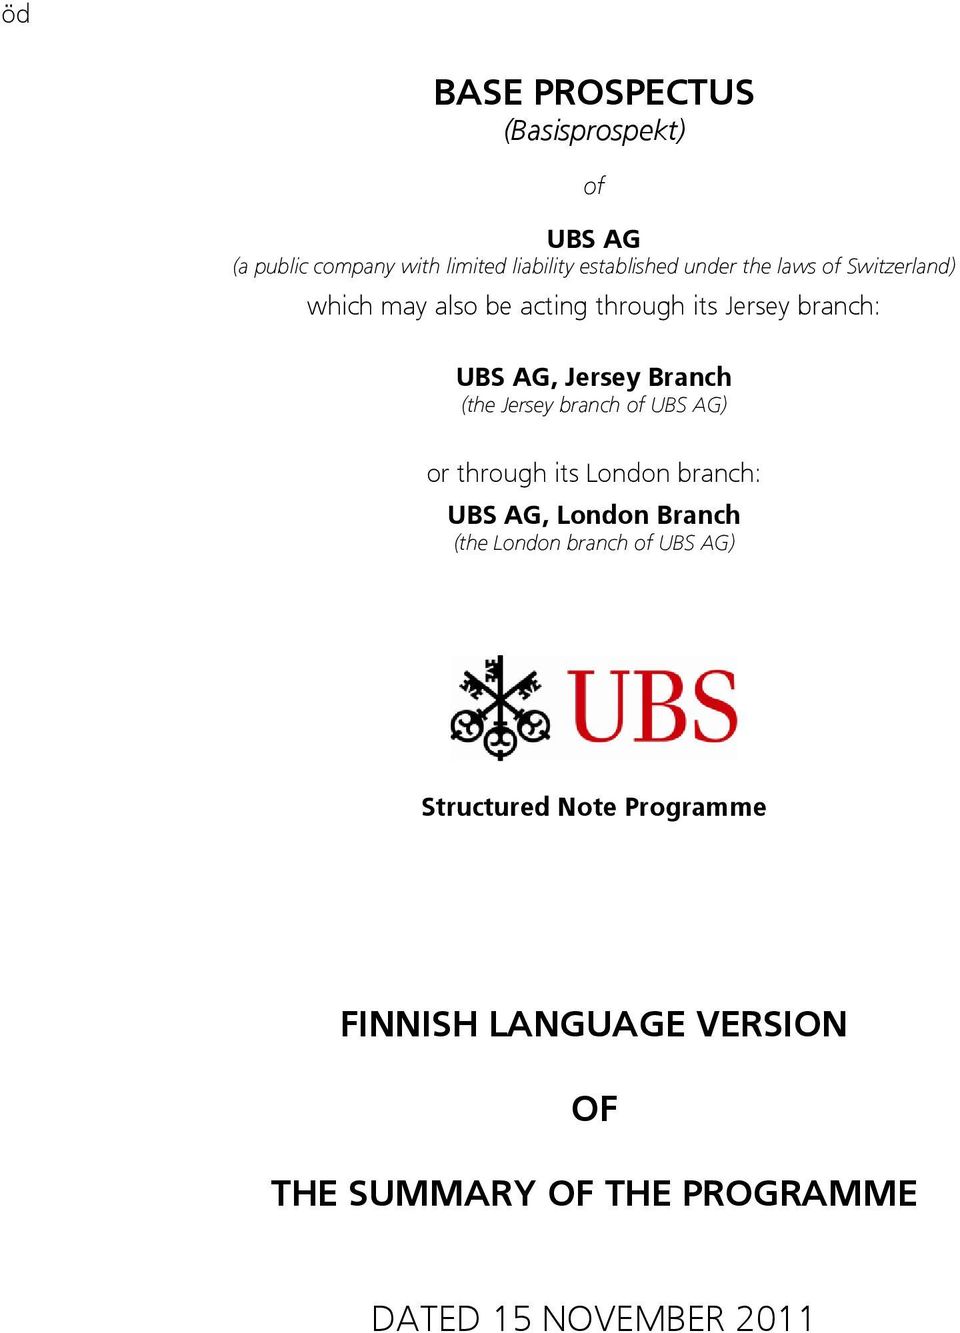 Jersey branch of UBS AG) or through its London branch: UBS AG, London Branch (the London branch of UBS